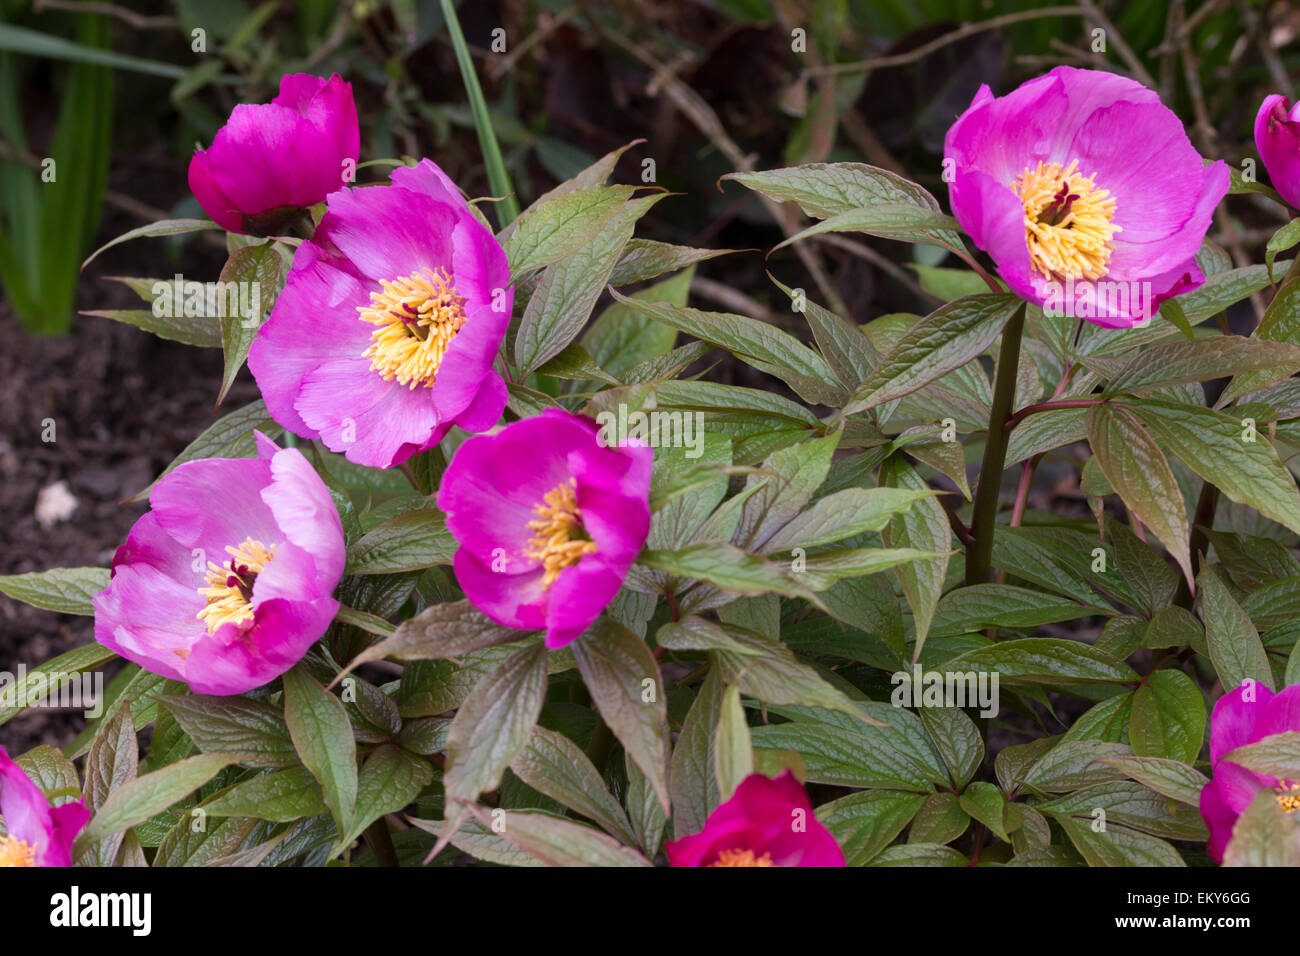 Multiple flowers of the  uncommon Chinese species peony, Paeonia mairei, earliest in flower in Spring Stock Photo